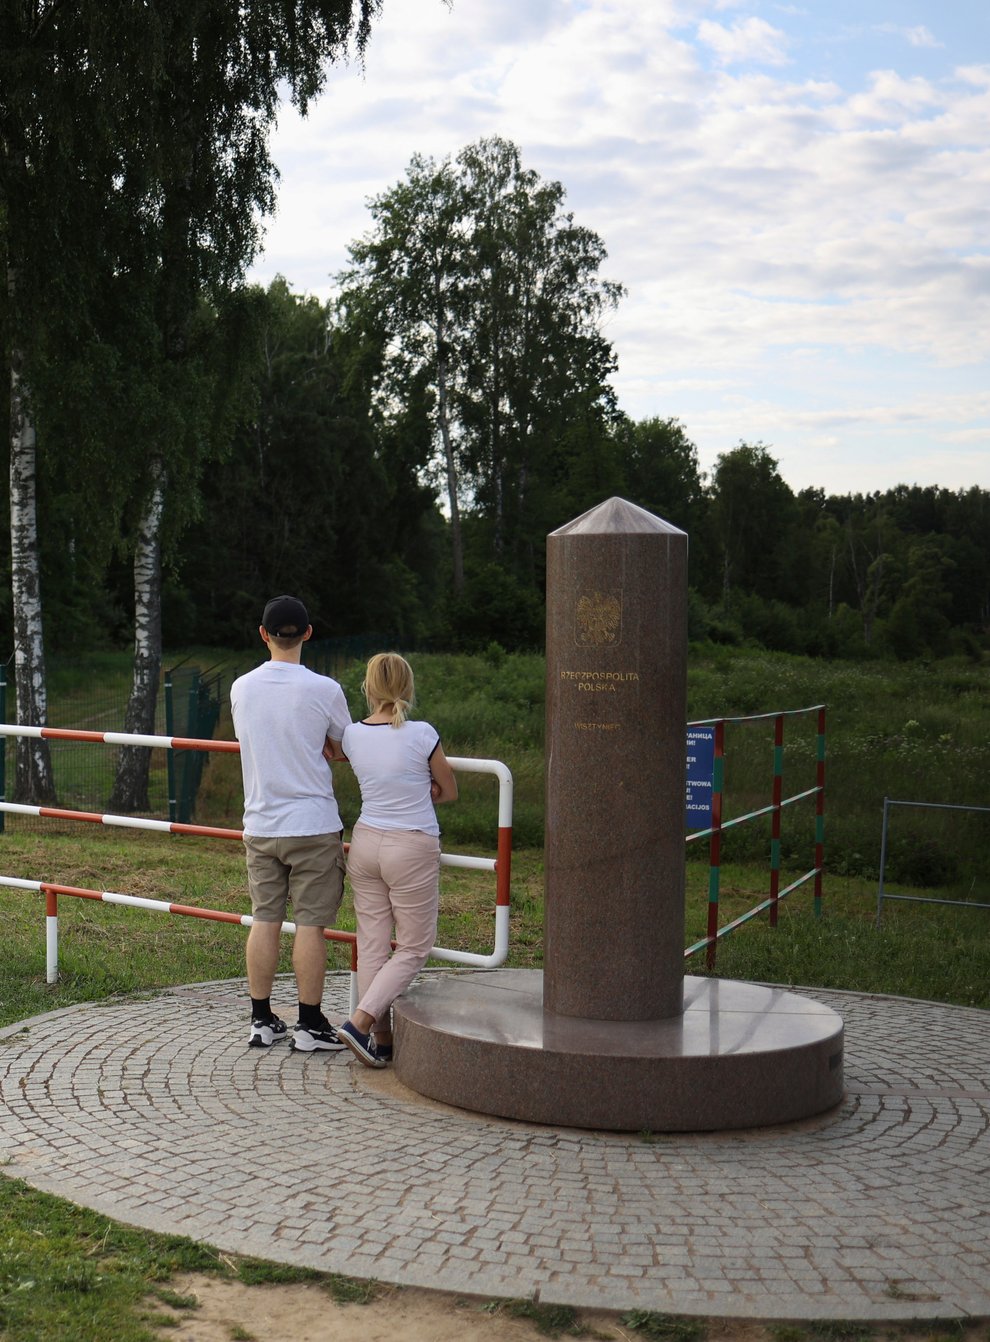 People visit the area of tripoint marking the place where borders of Poland, Lithuania and Russia’s Kaliningrad Oblast meet, in Zerdziny, Poland (Michal Dyjuk/AP)